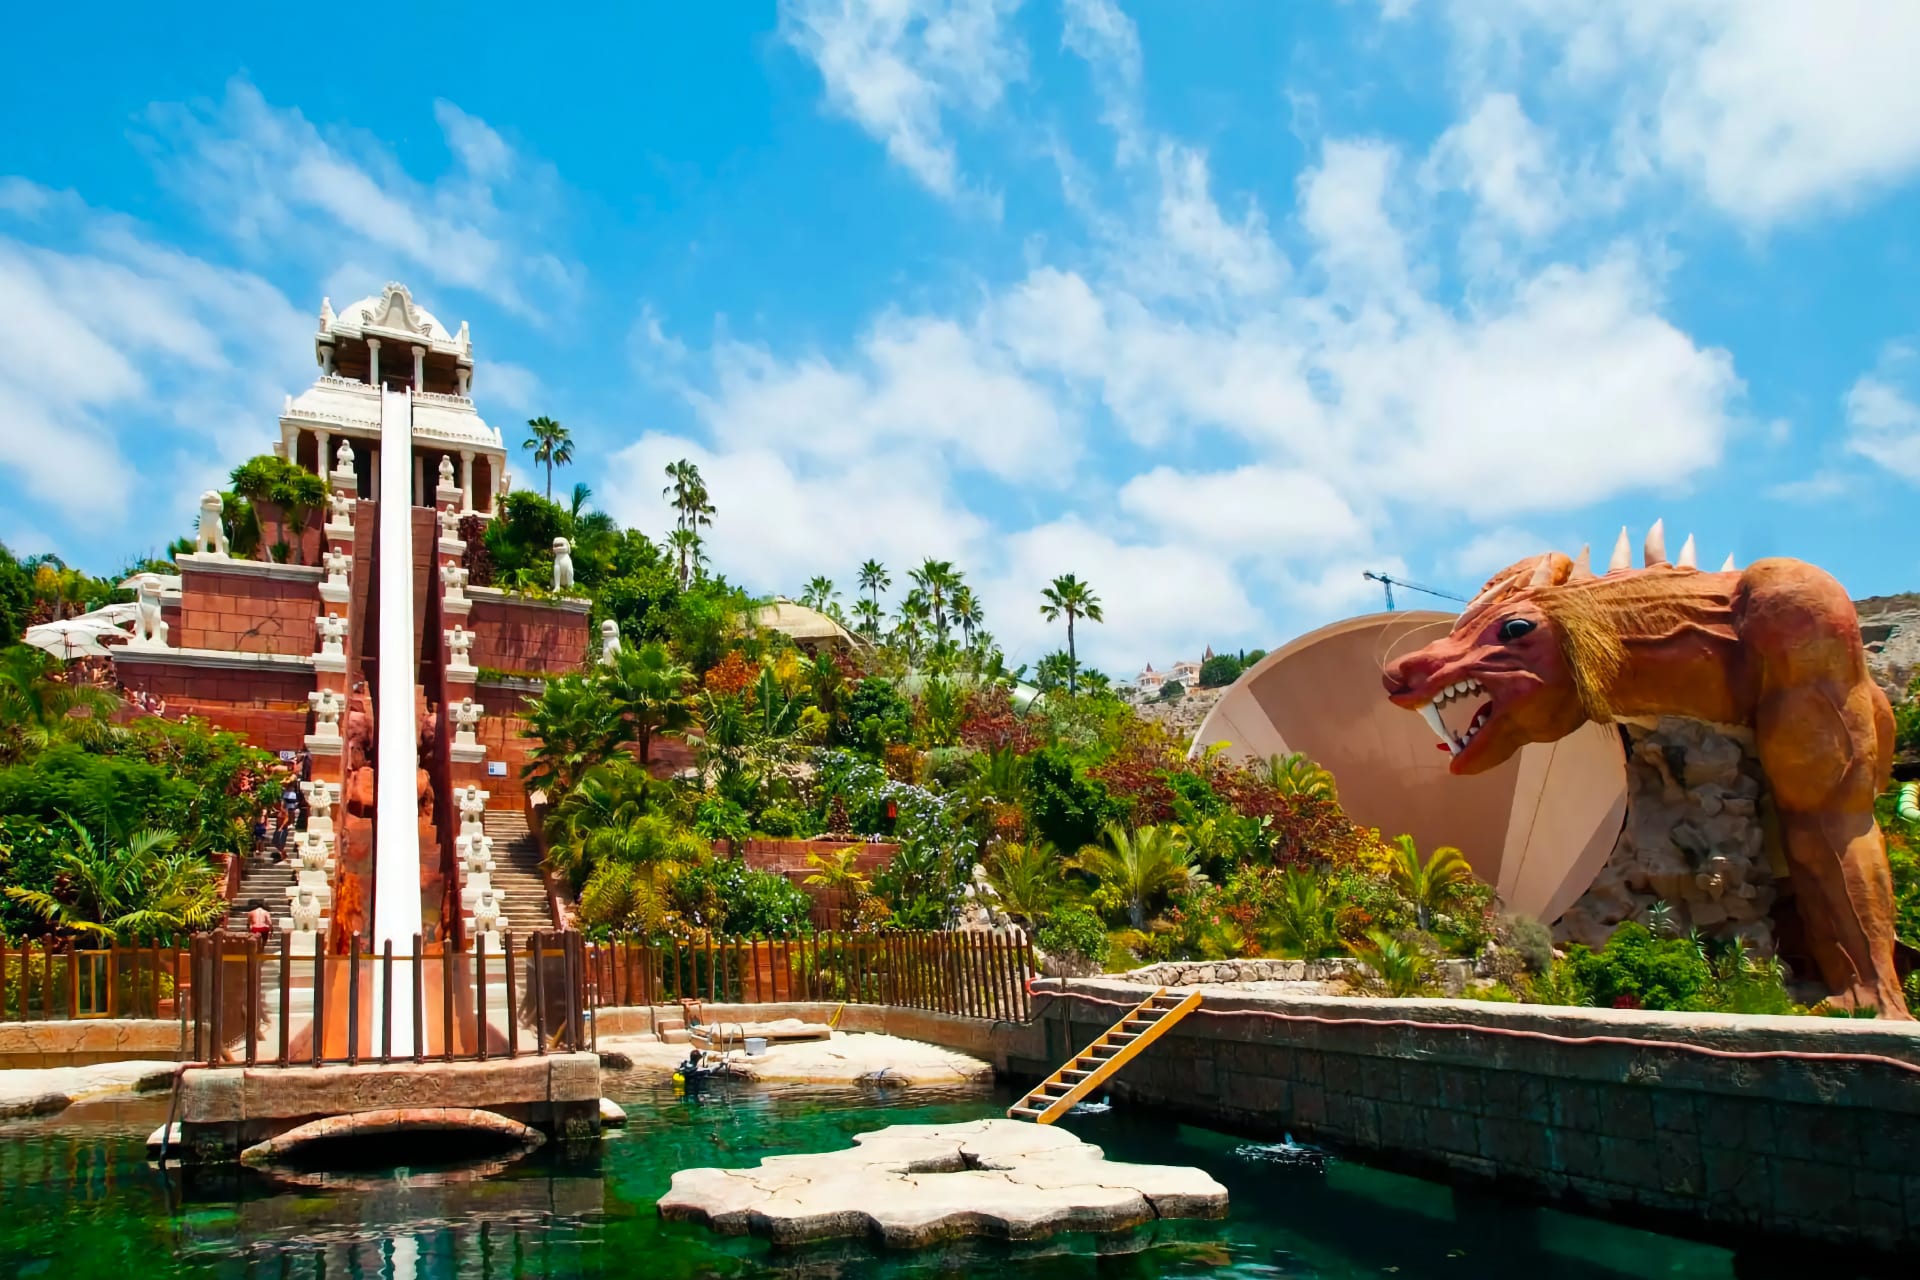 Tower of Power Siam Park